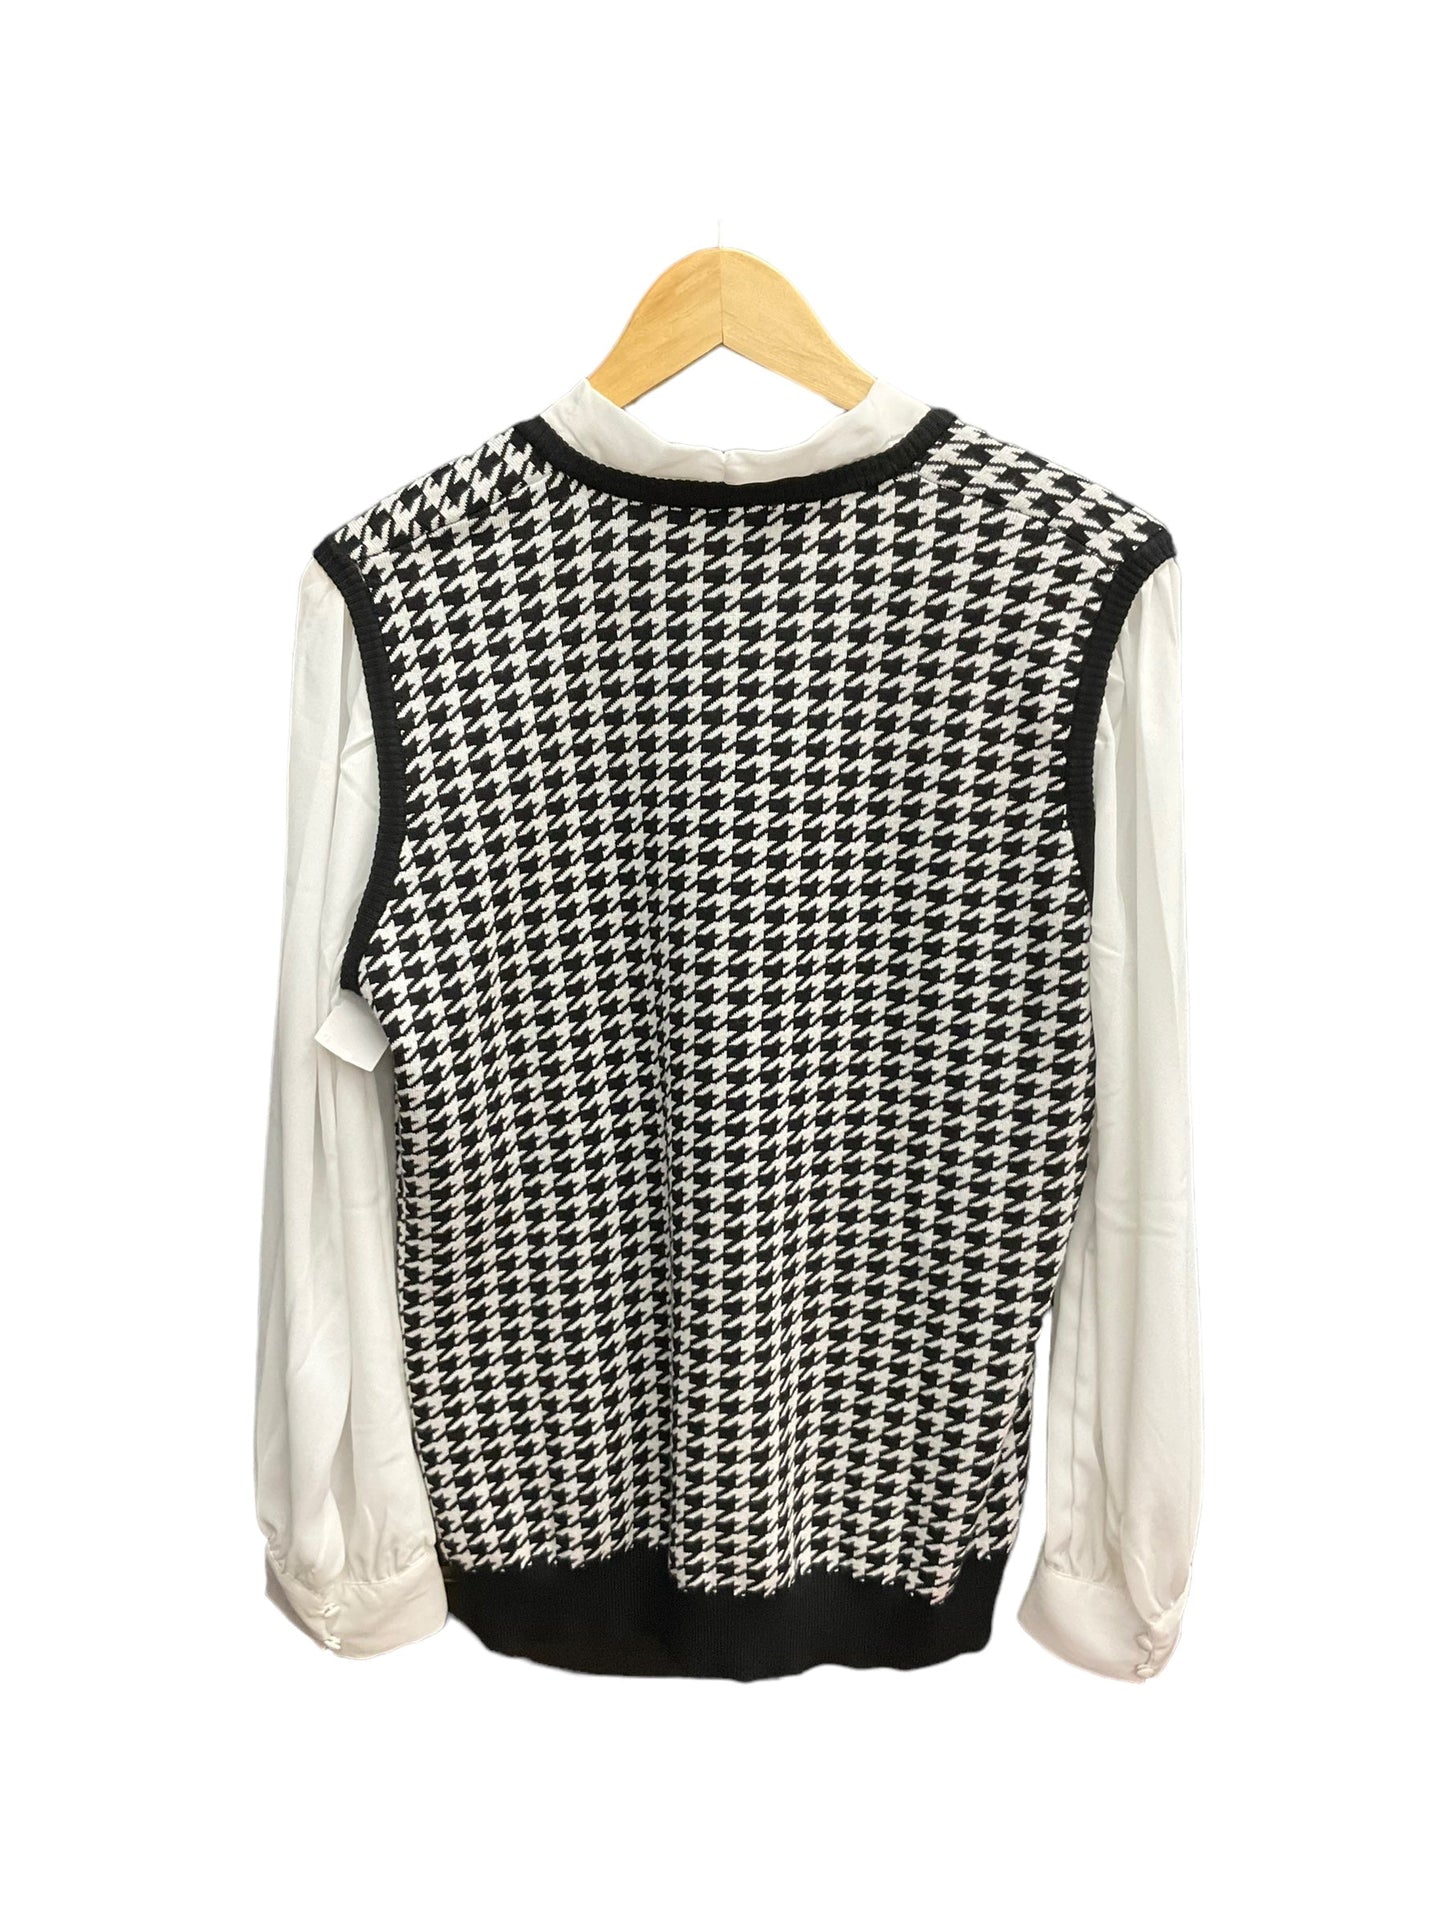 Black & White Top Long Sleeve Adrianna Papell, Size L